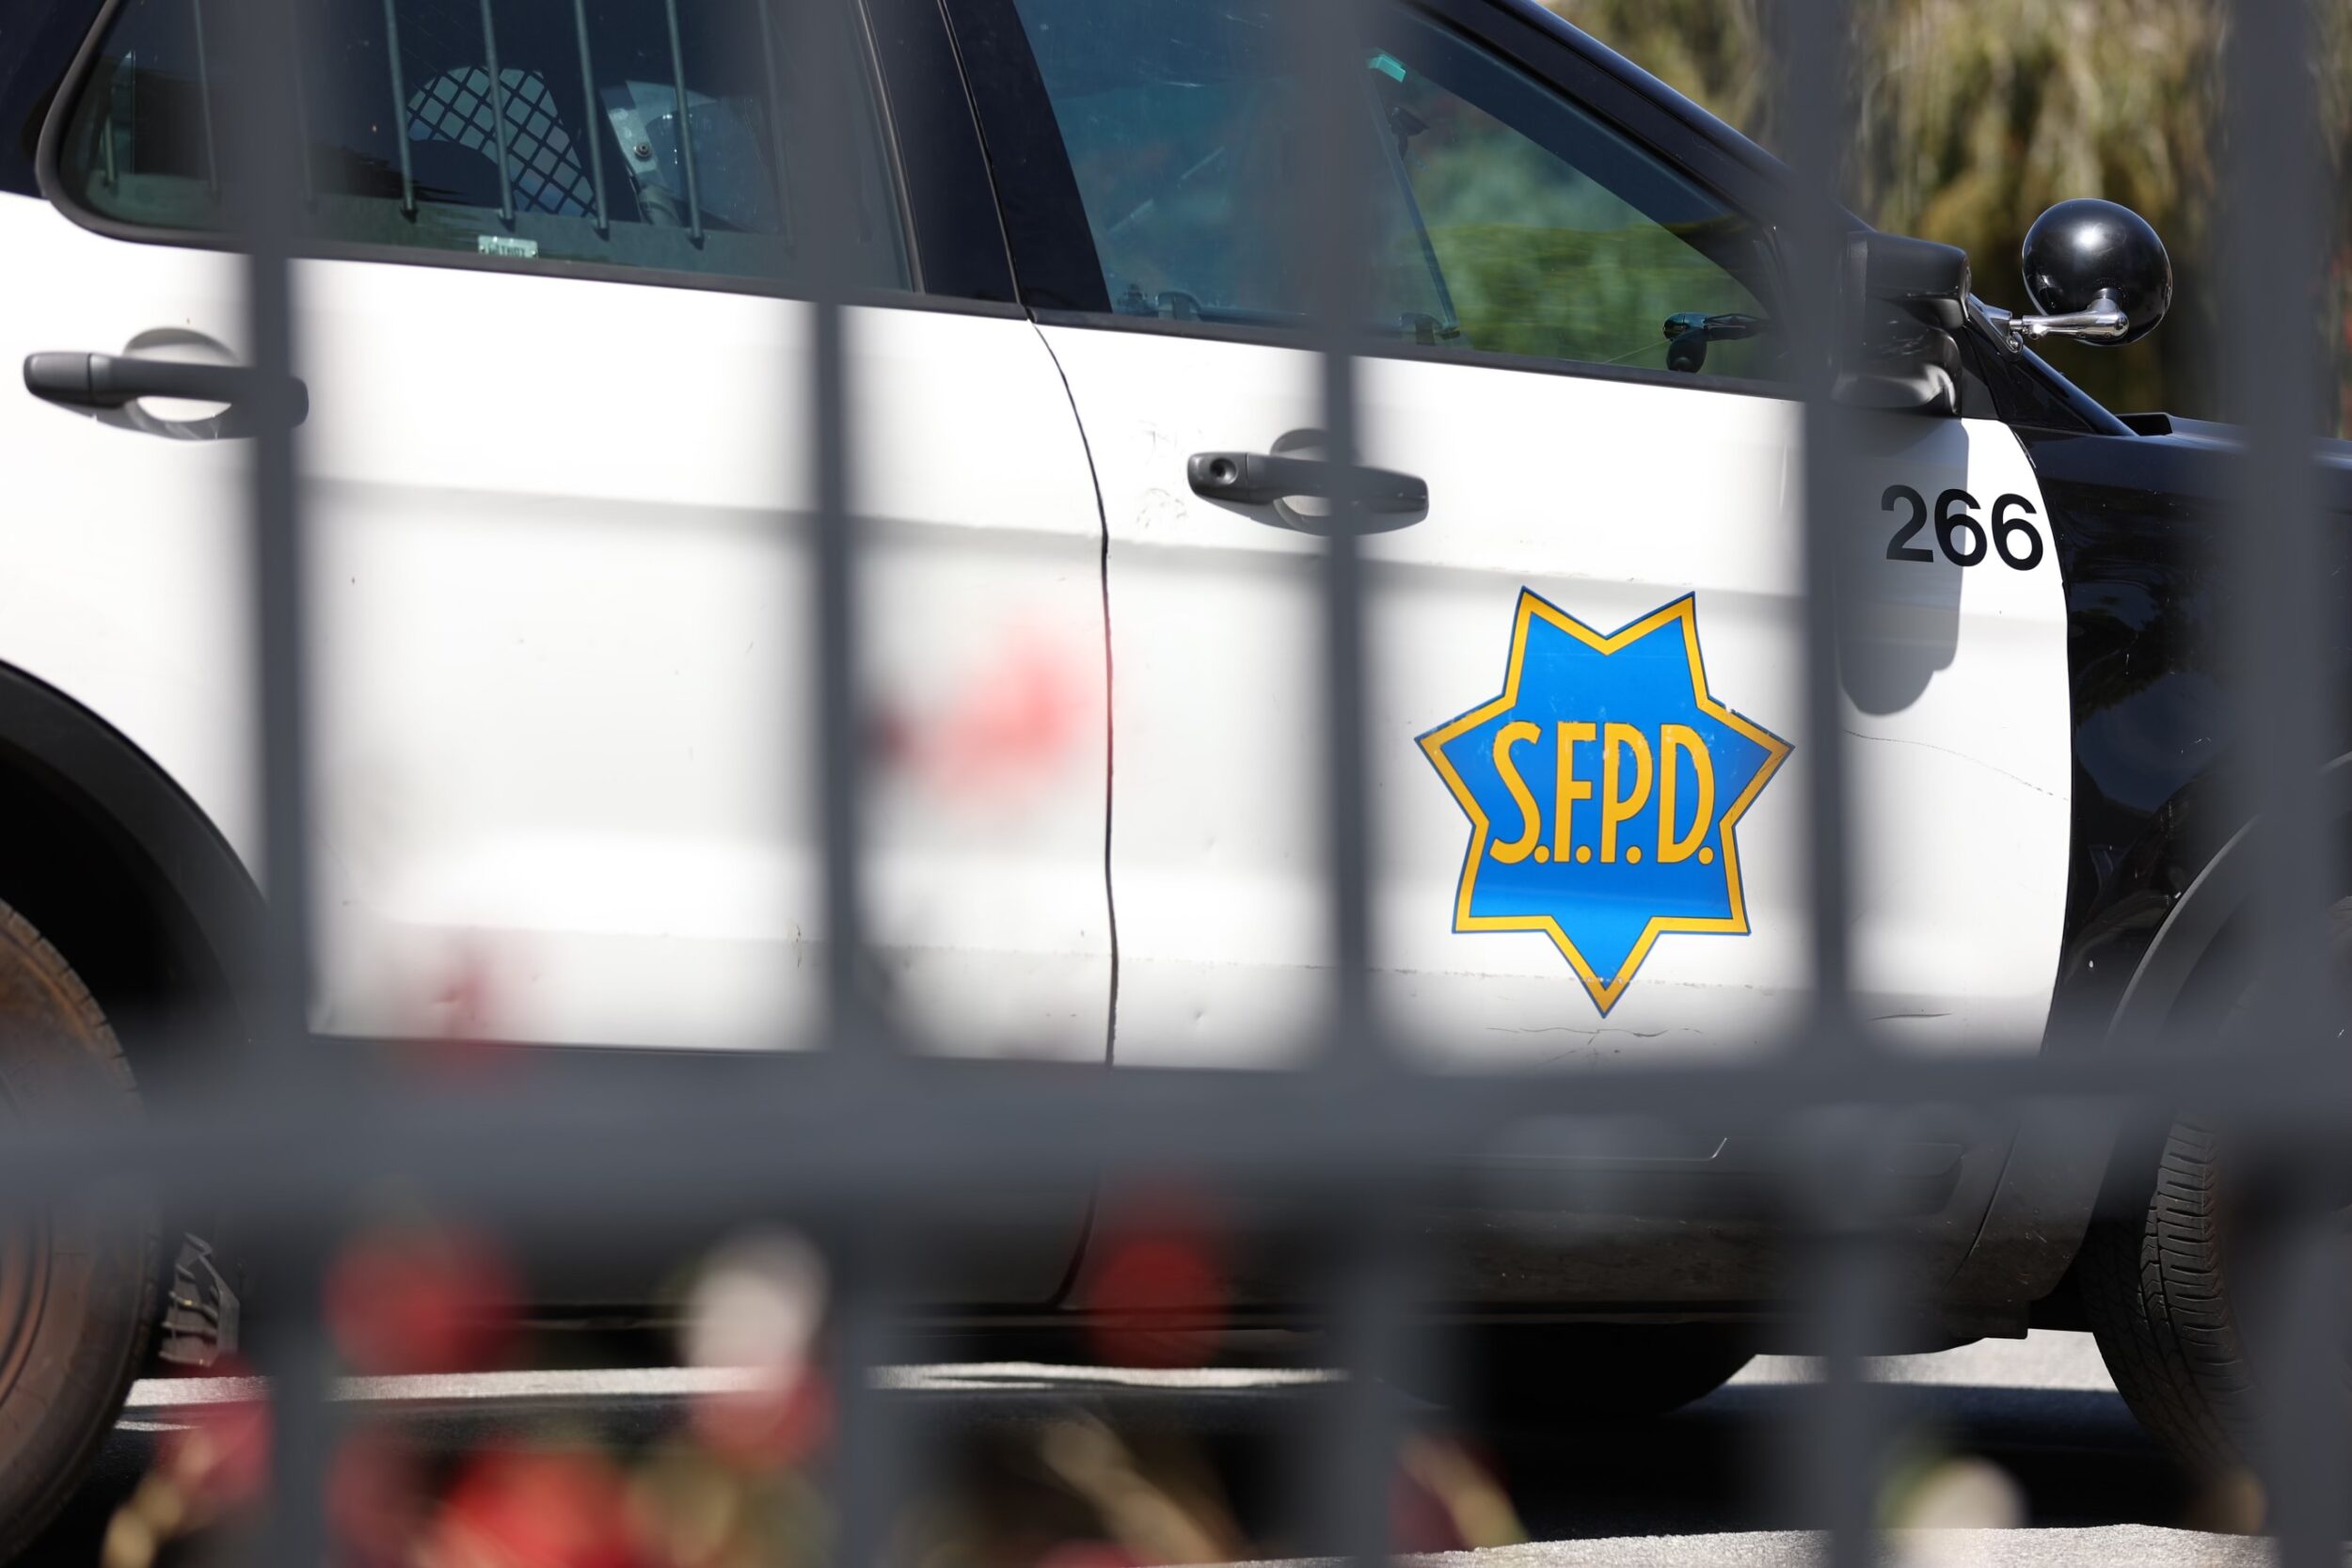 A police car with "S.F.P.D." badge, viewed through a blurred fence.